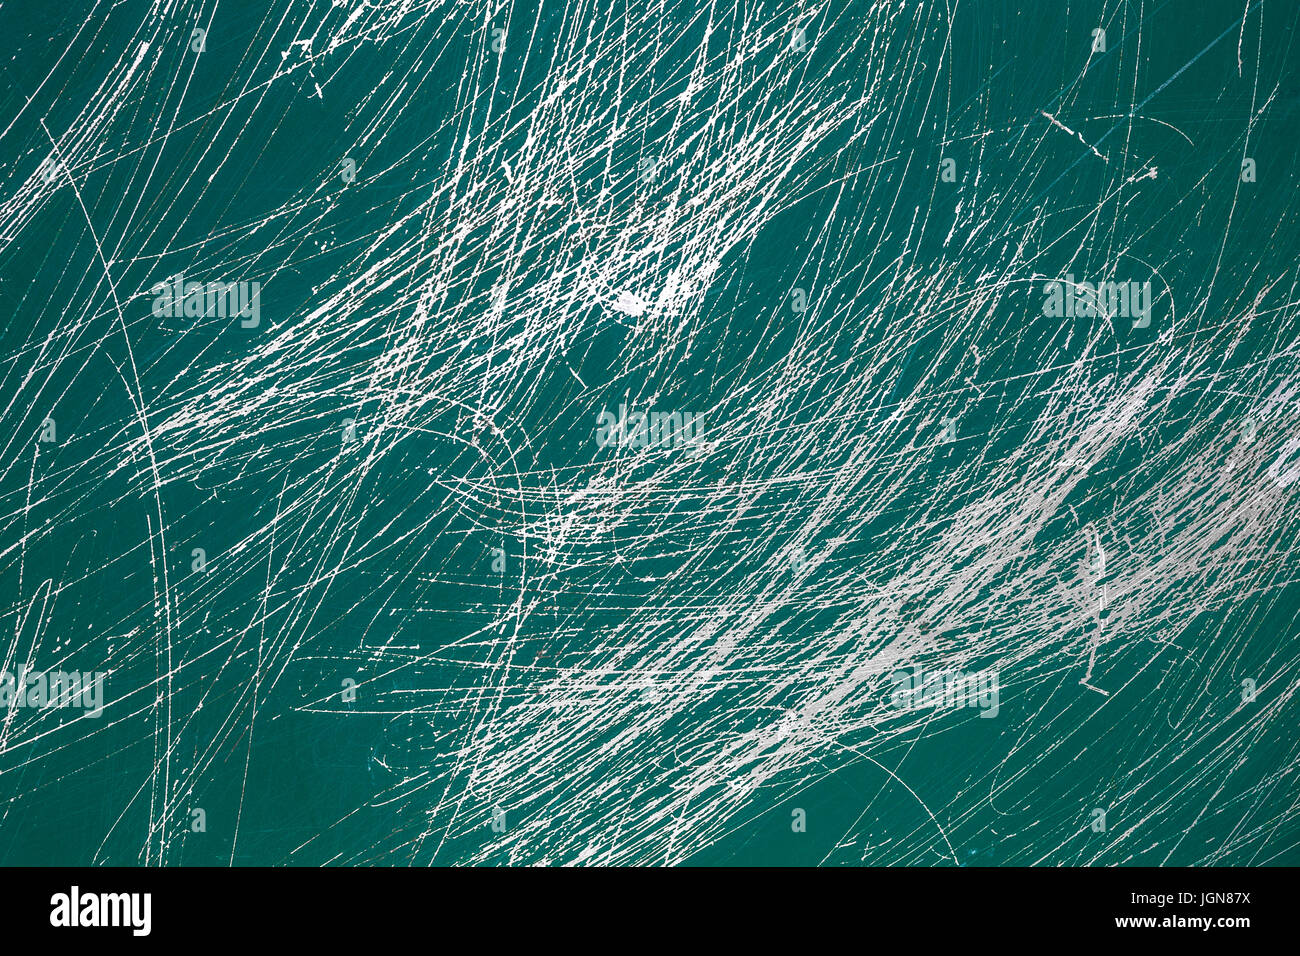 Rough scratched metal background, old green metallic texture Stock Photo